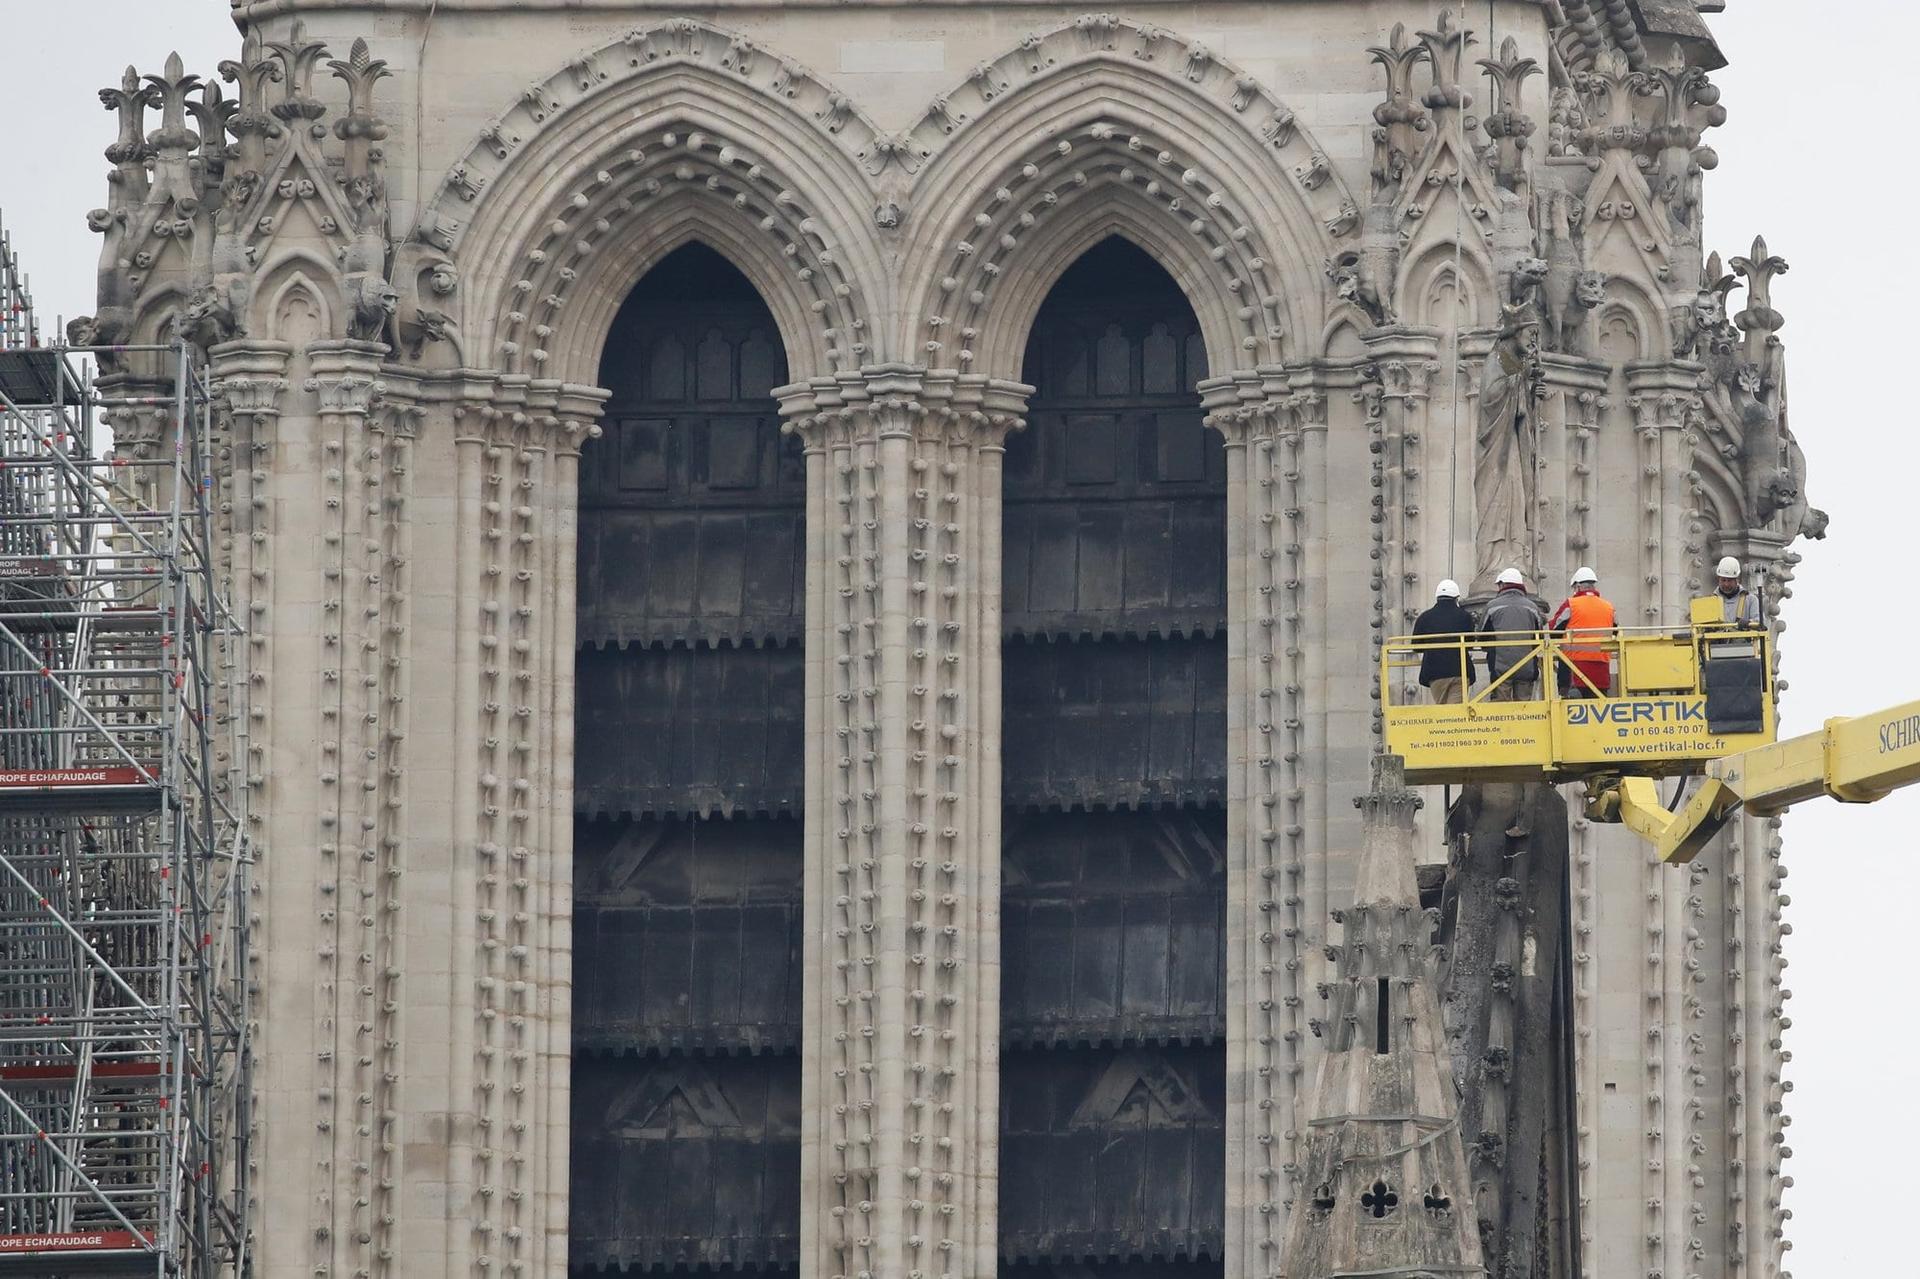 World Trade Center to pay tribute to Notre Dame cathedral